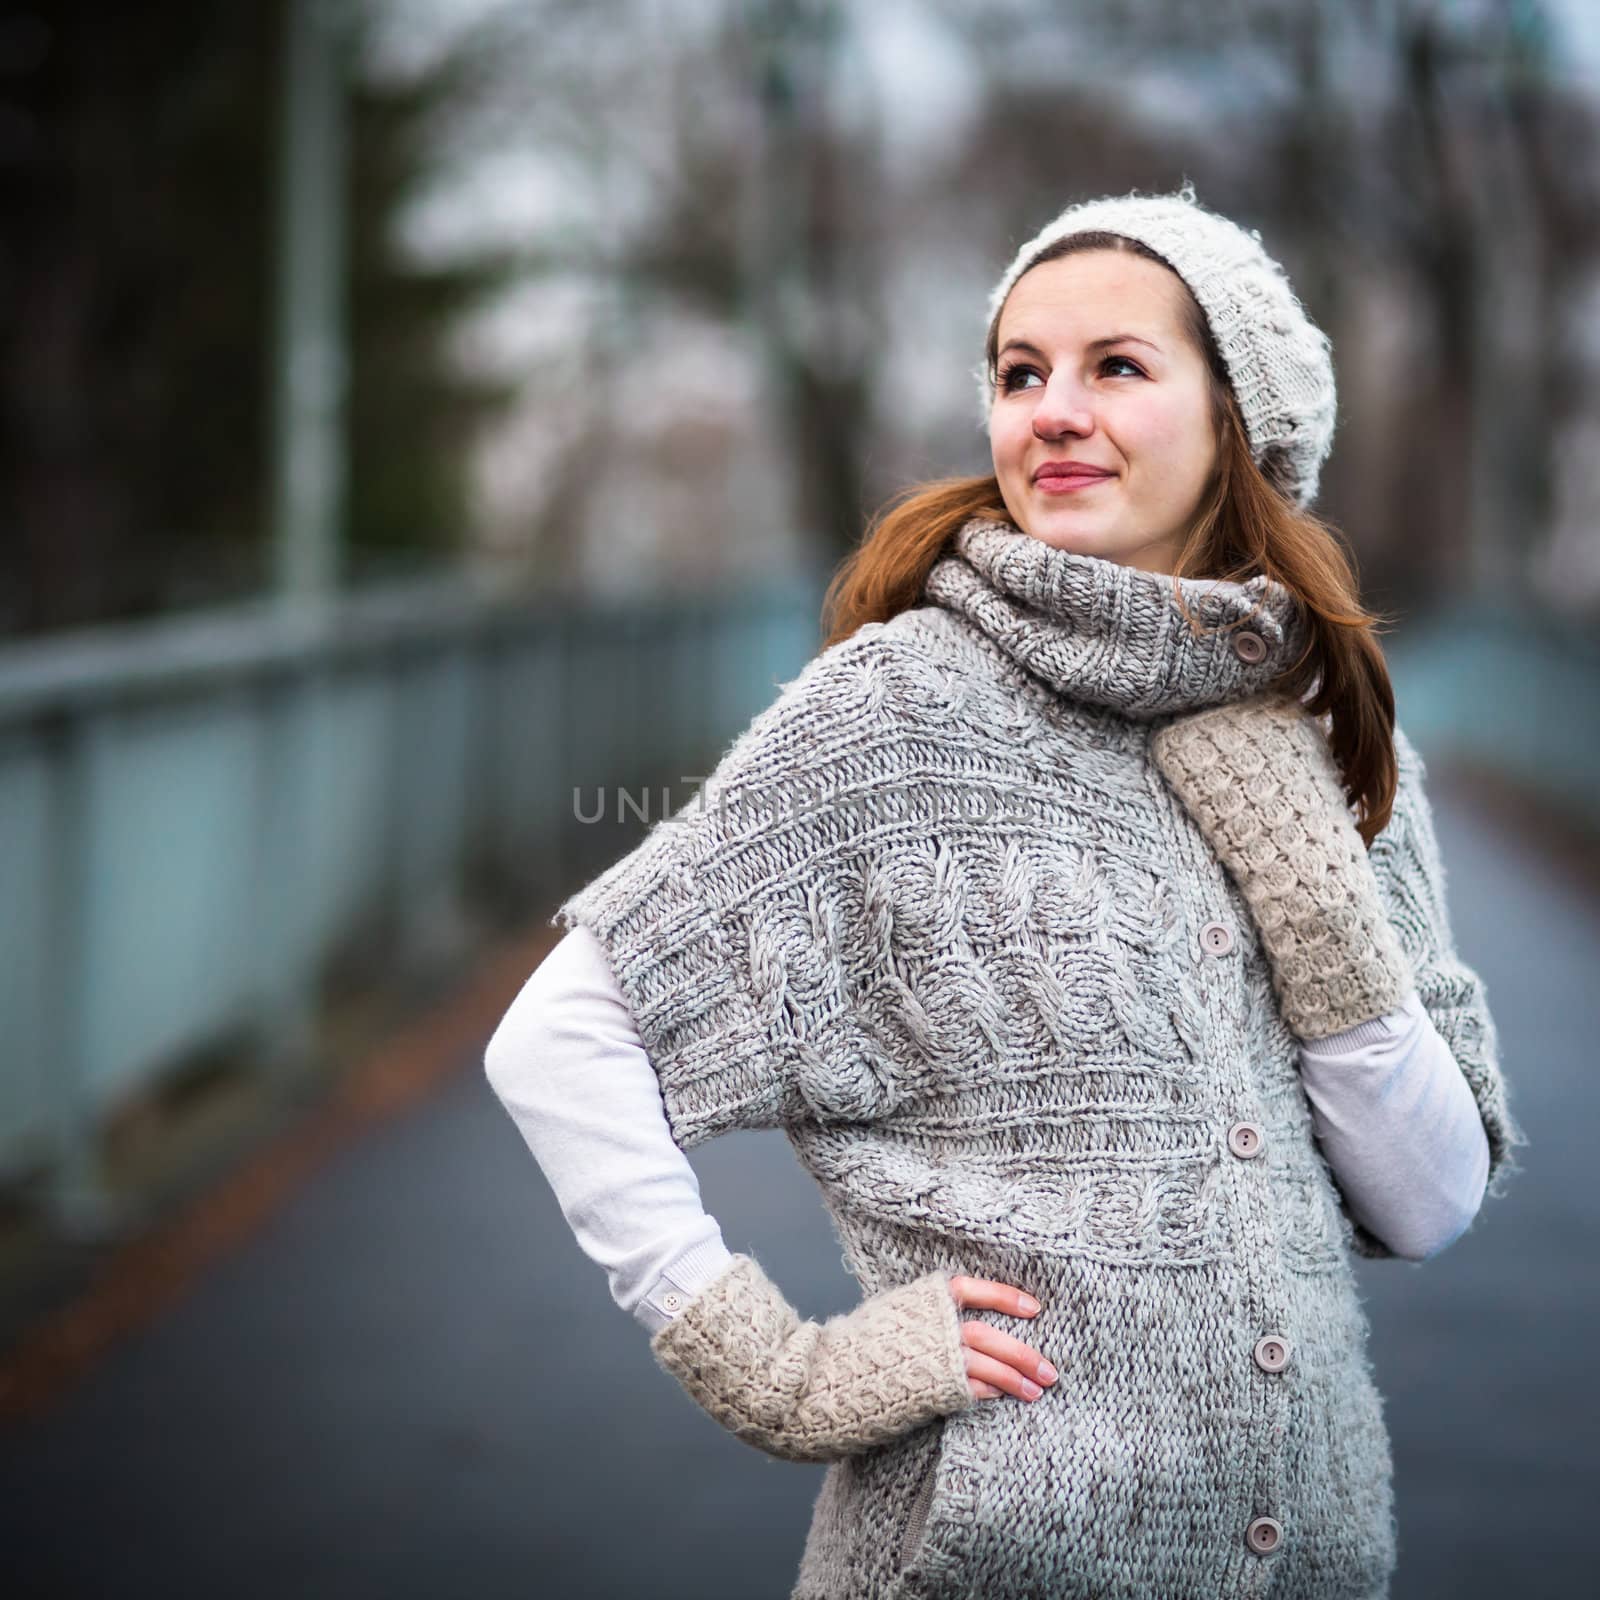 Young woman dressed in a warm woolen cardigan by viktor_cap